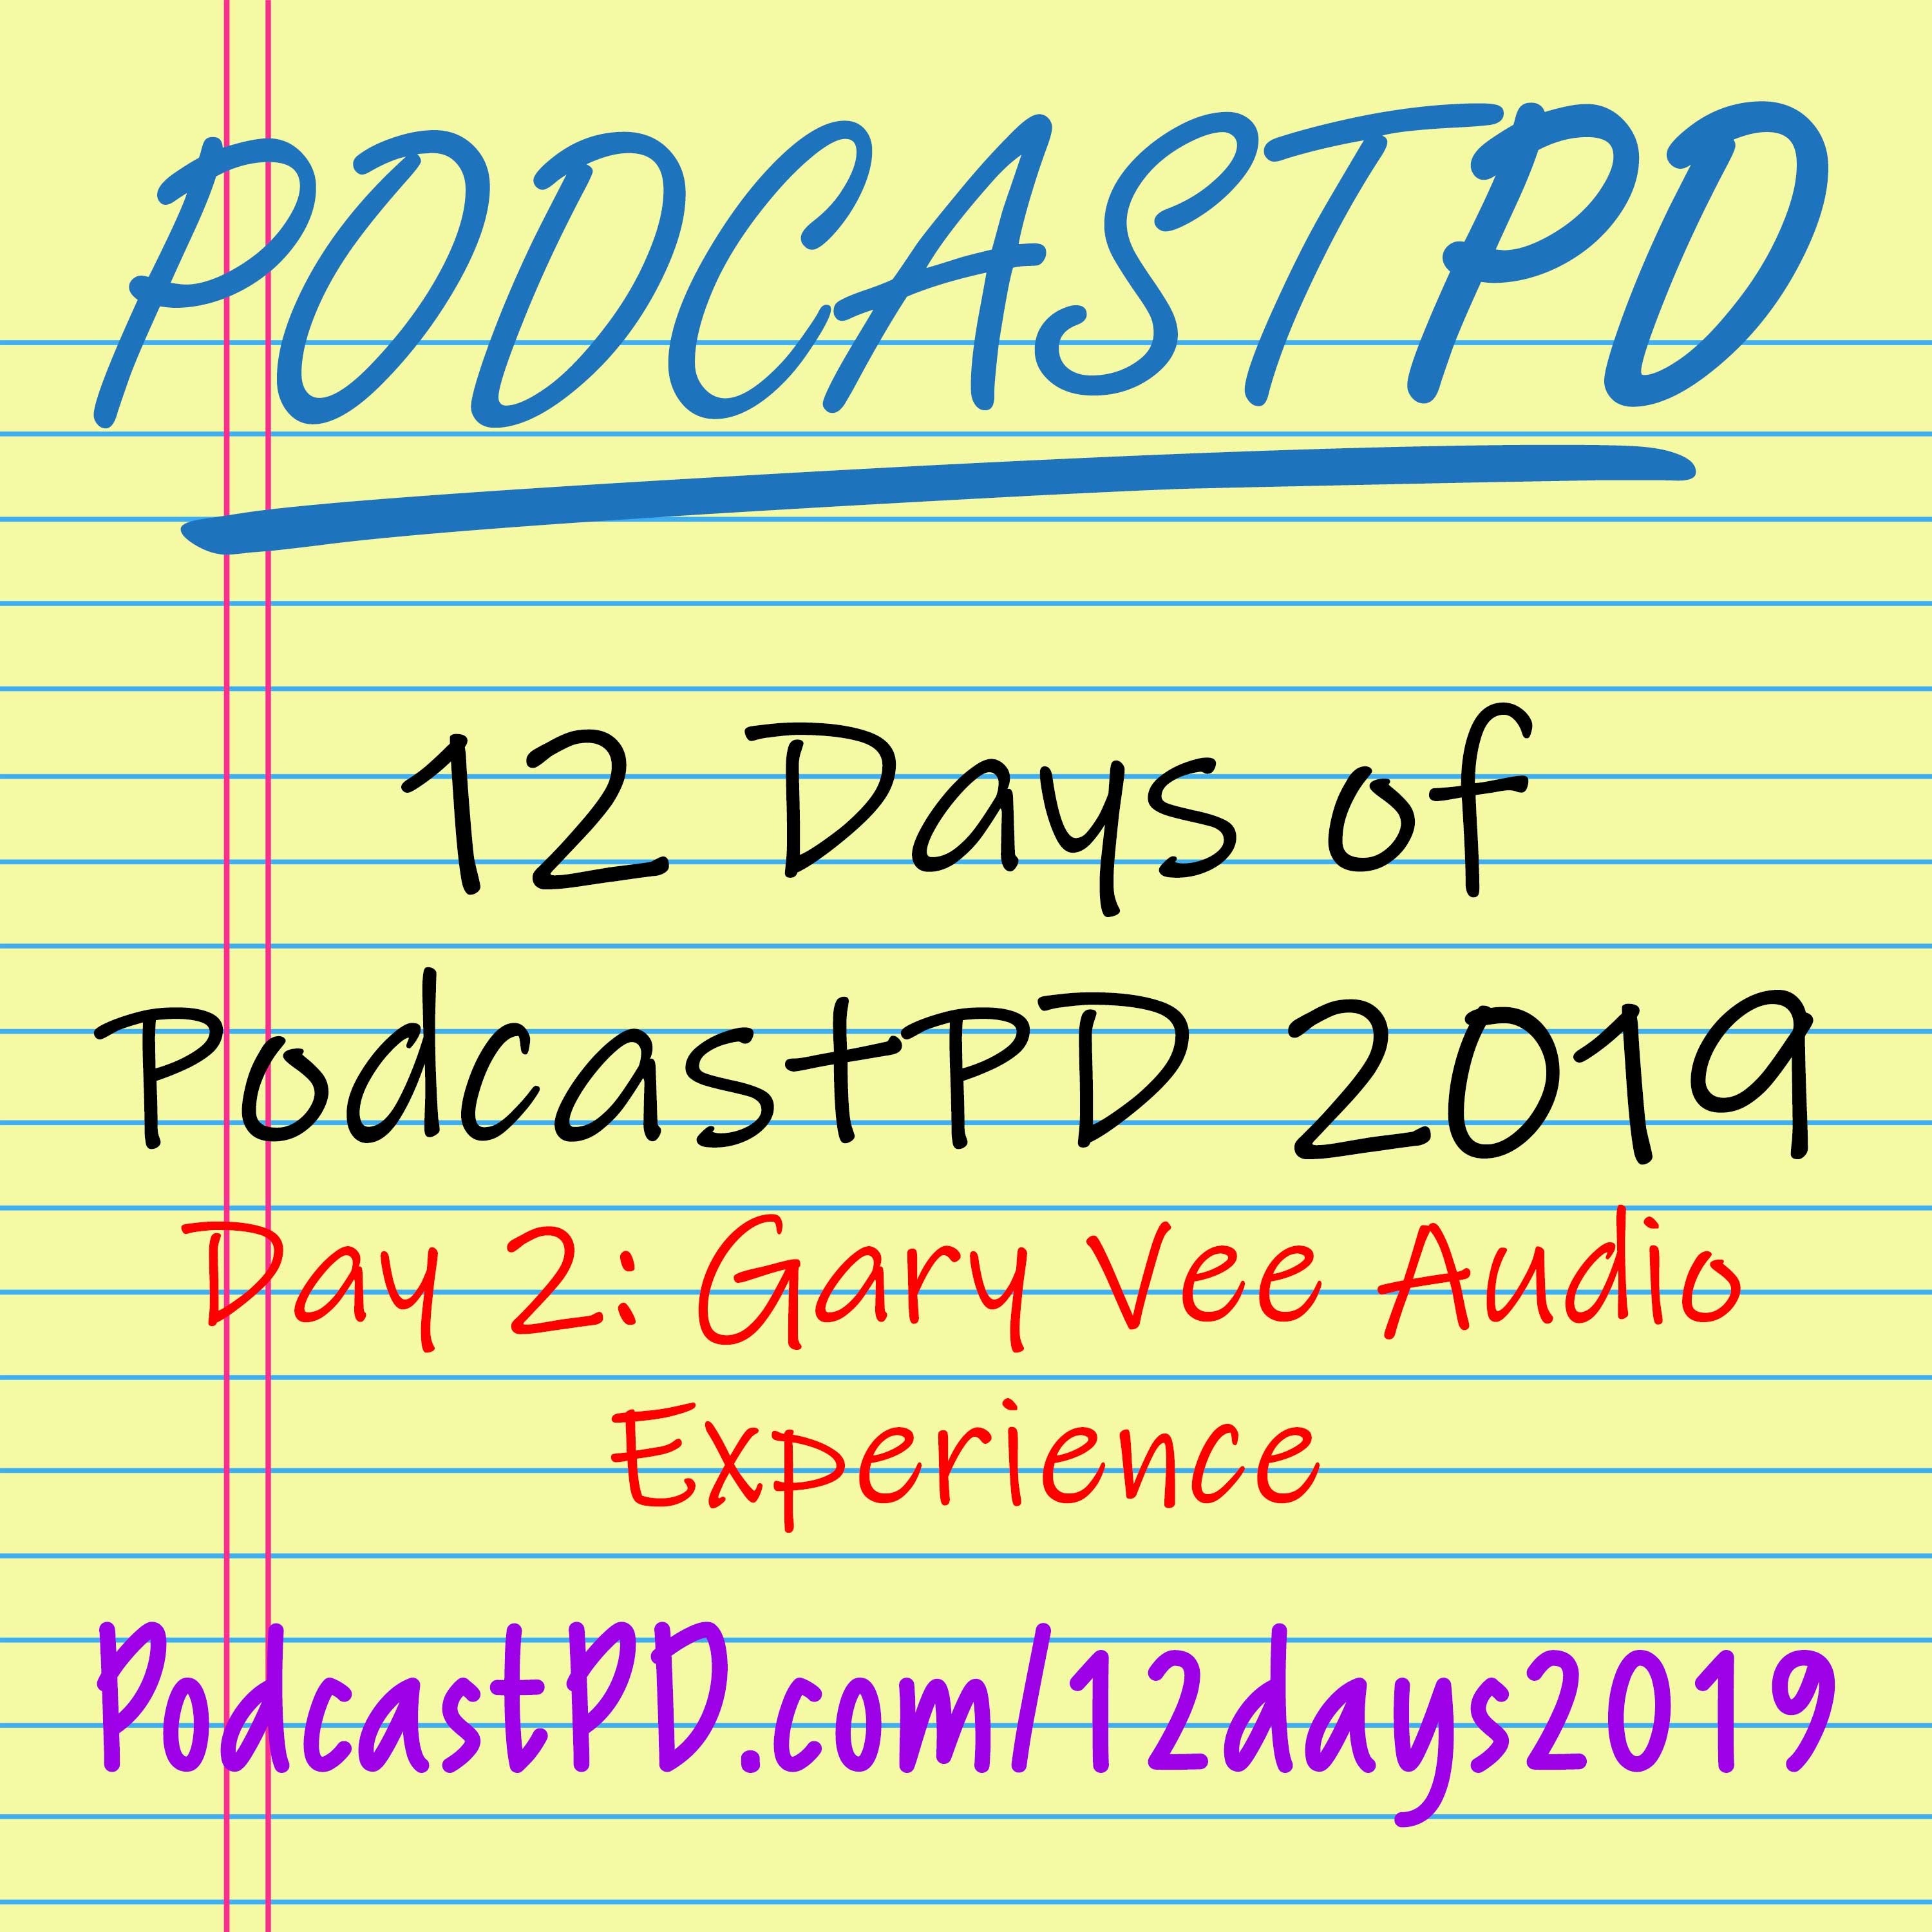 Gary Vee Audio Experience - 12 Days of PodcastPD 2019 Image